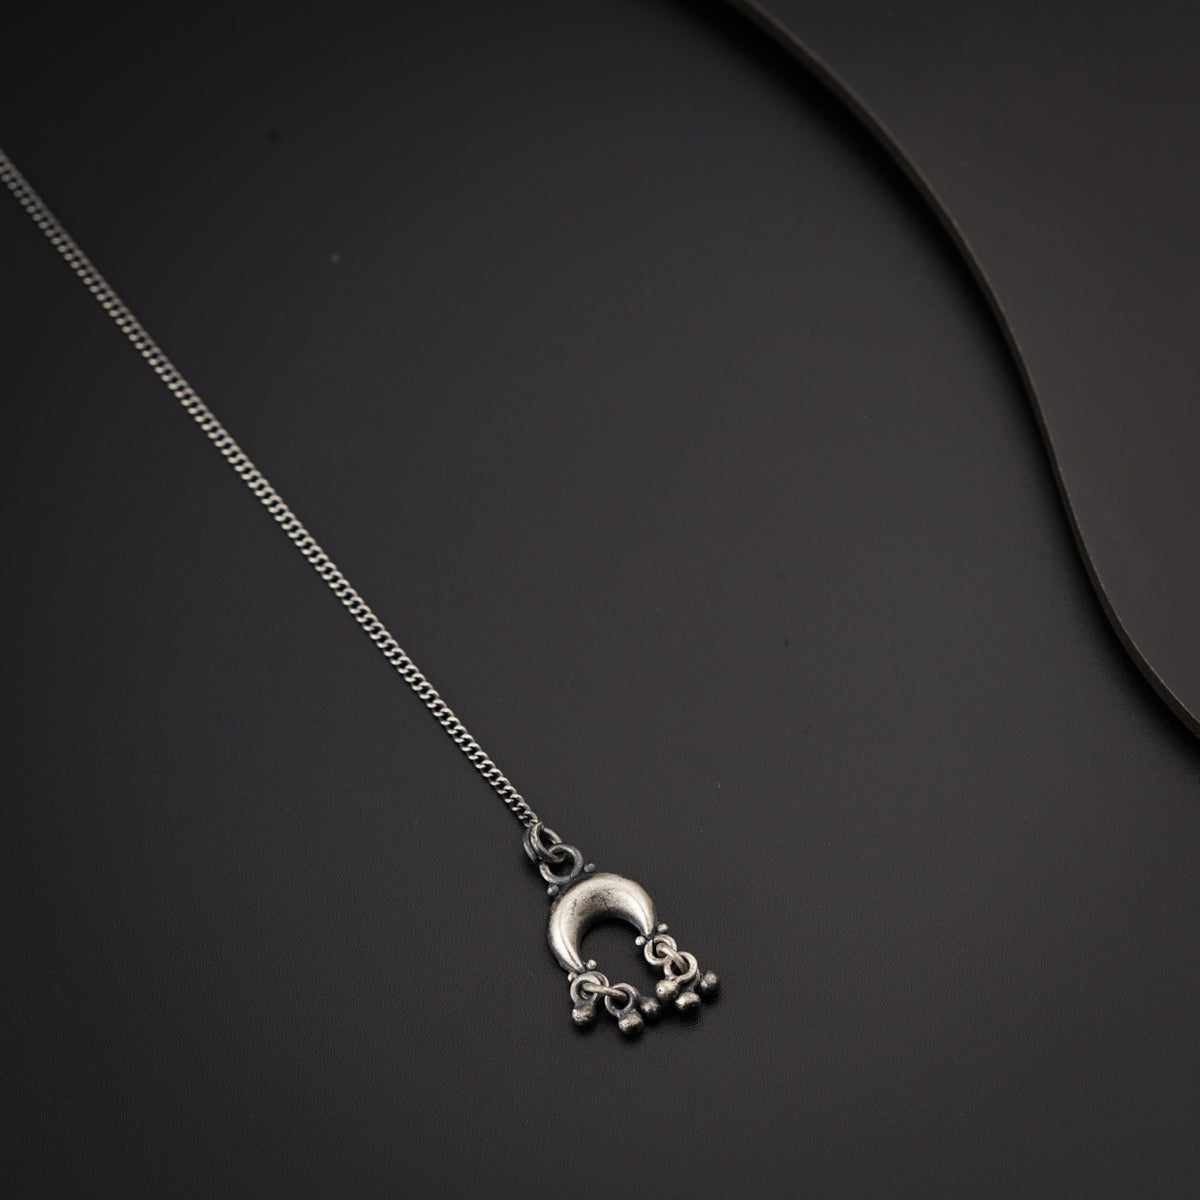 a necklace with a skull and crossbones on it